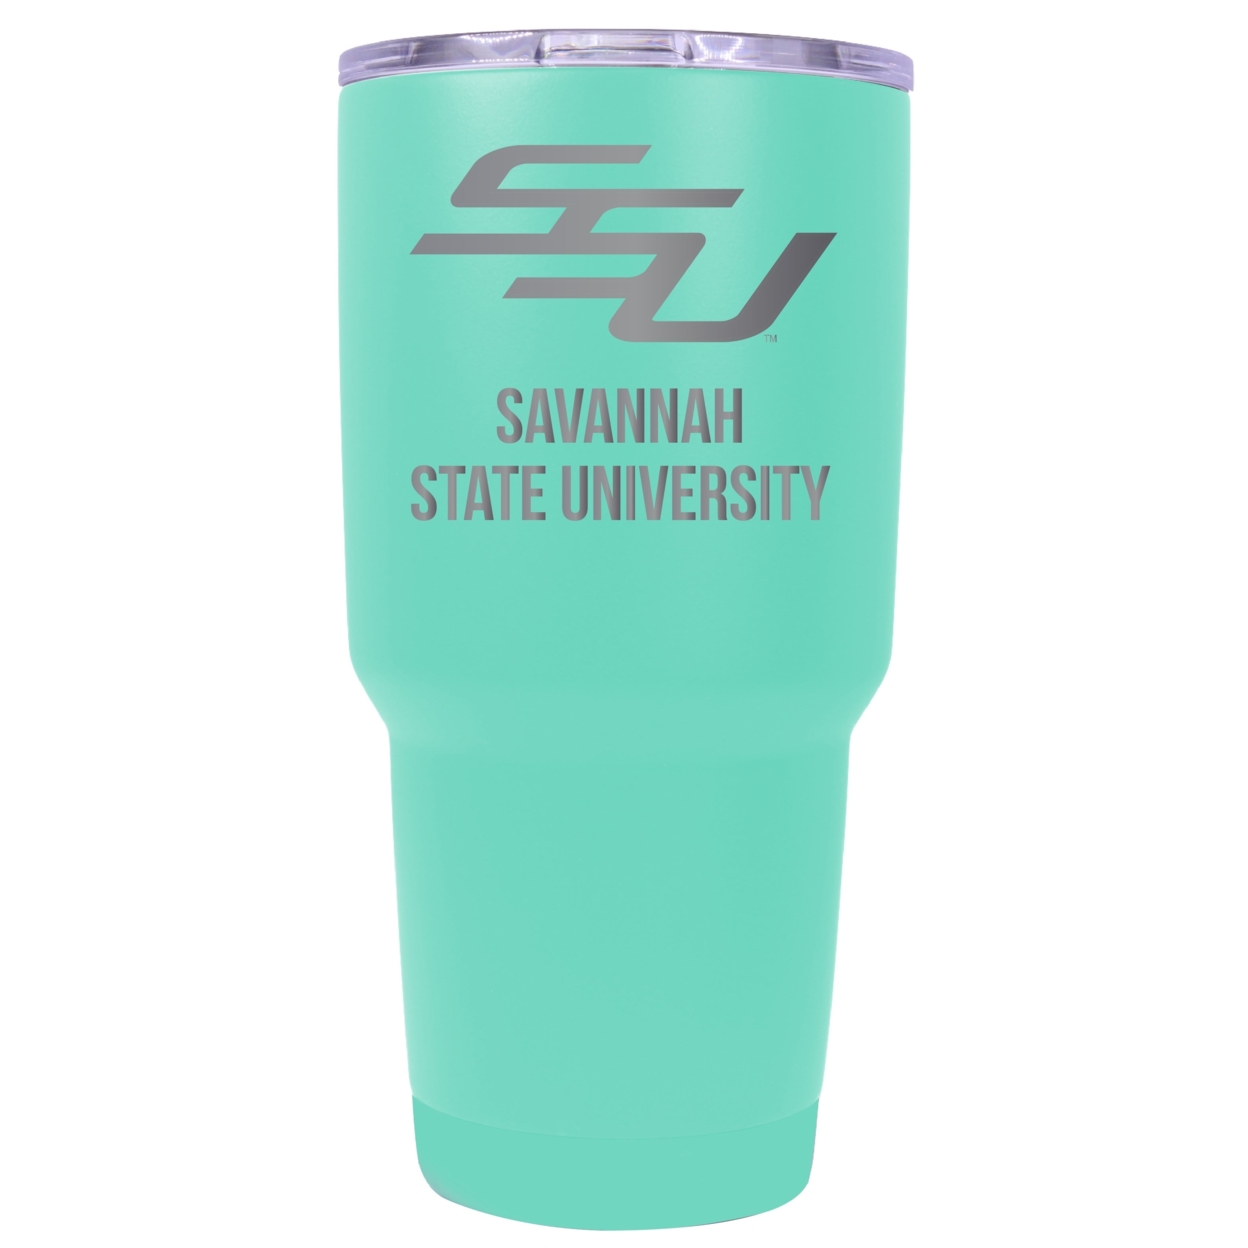 Savannah State University 24 Oz Laser Engraved Stainless Steel Insulated Tumbler - Choose Your Color. - Seafoam